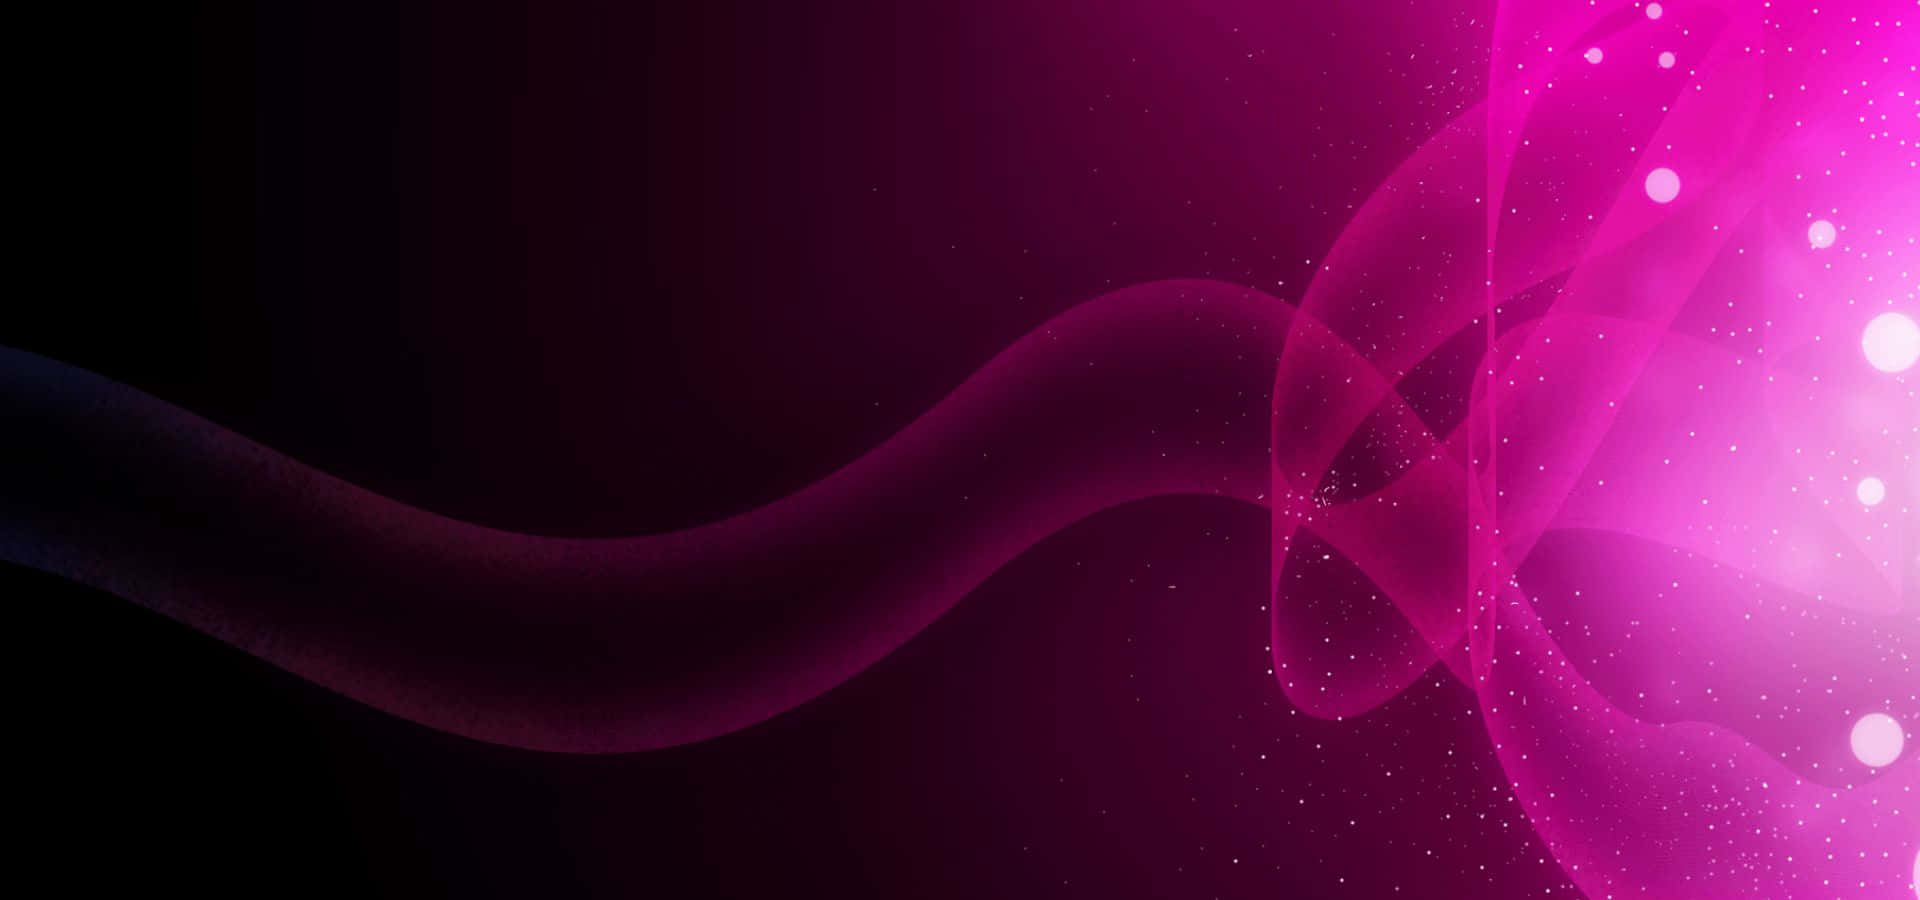 A Pink And Black Background With A Wave